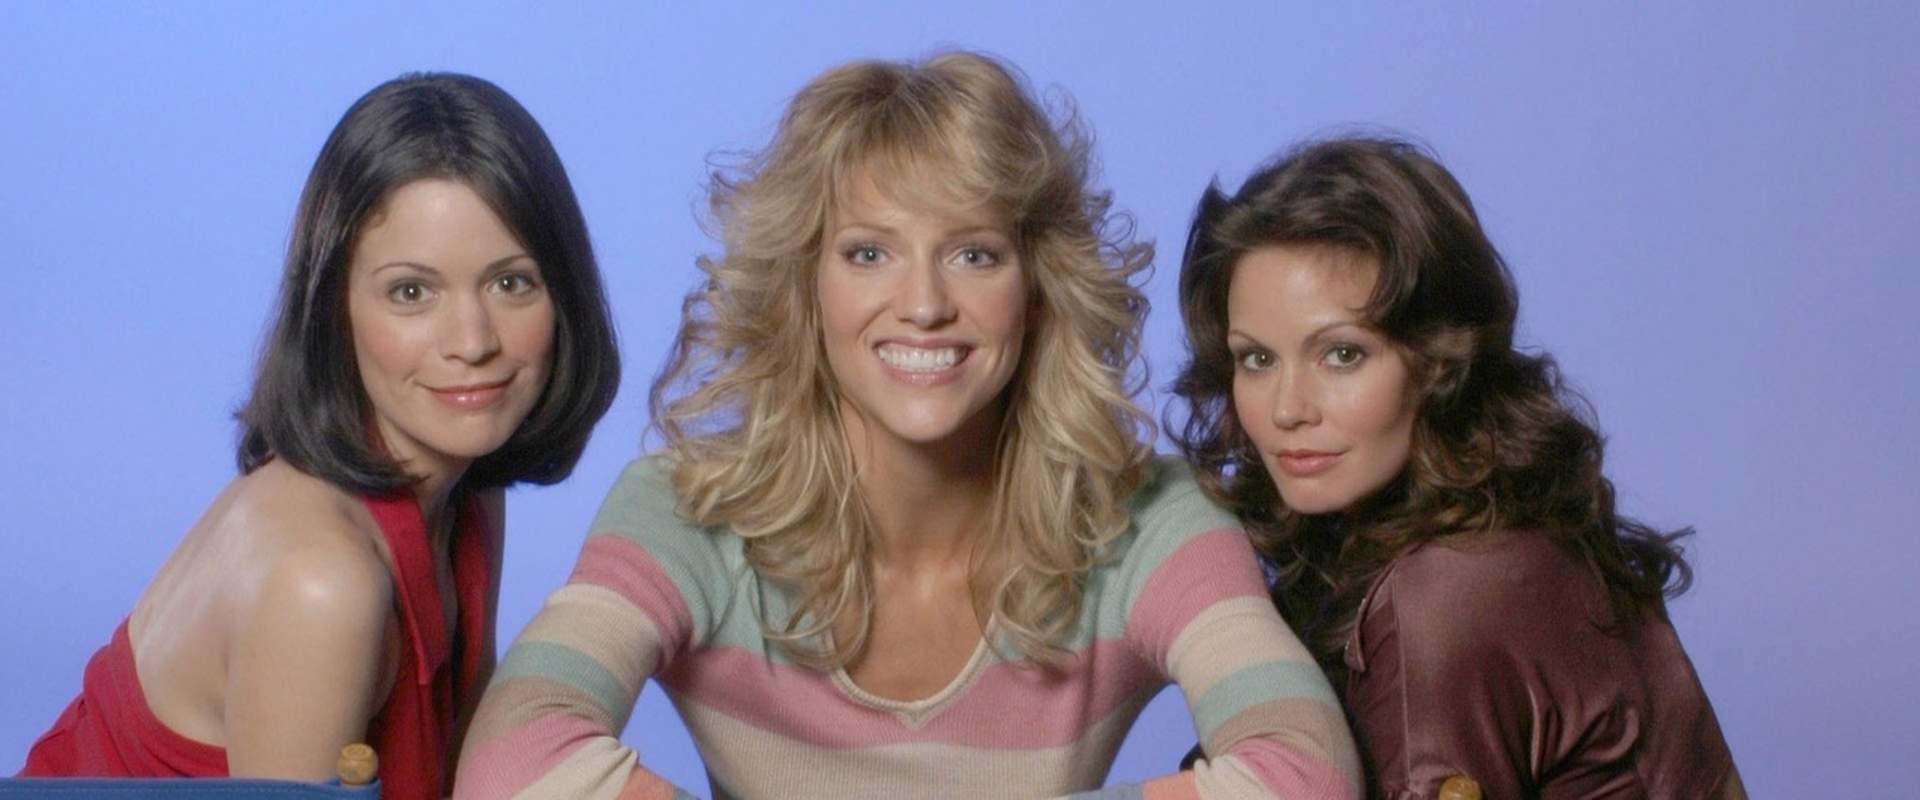 Behind the Camera: The Unauthorized Story of Charlie's Angels background 2